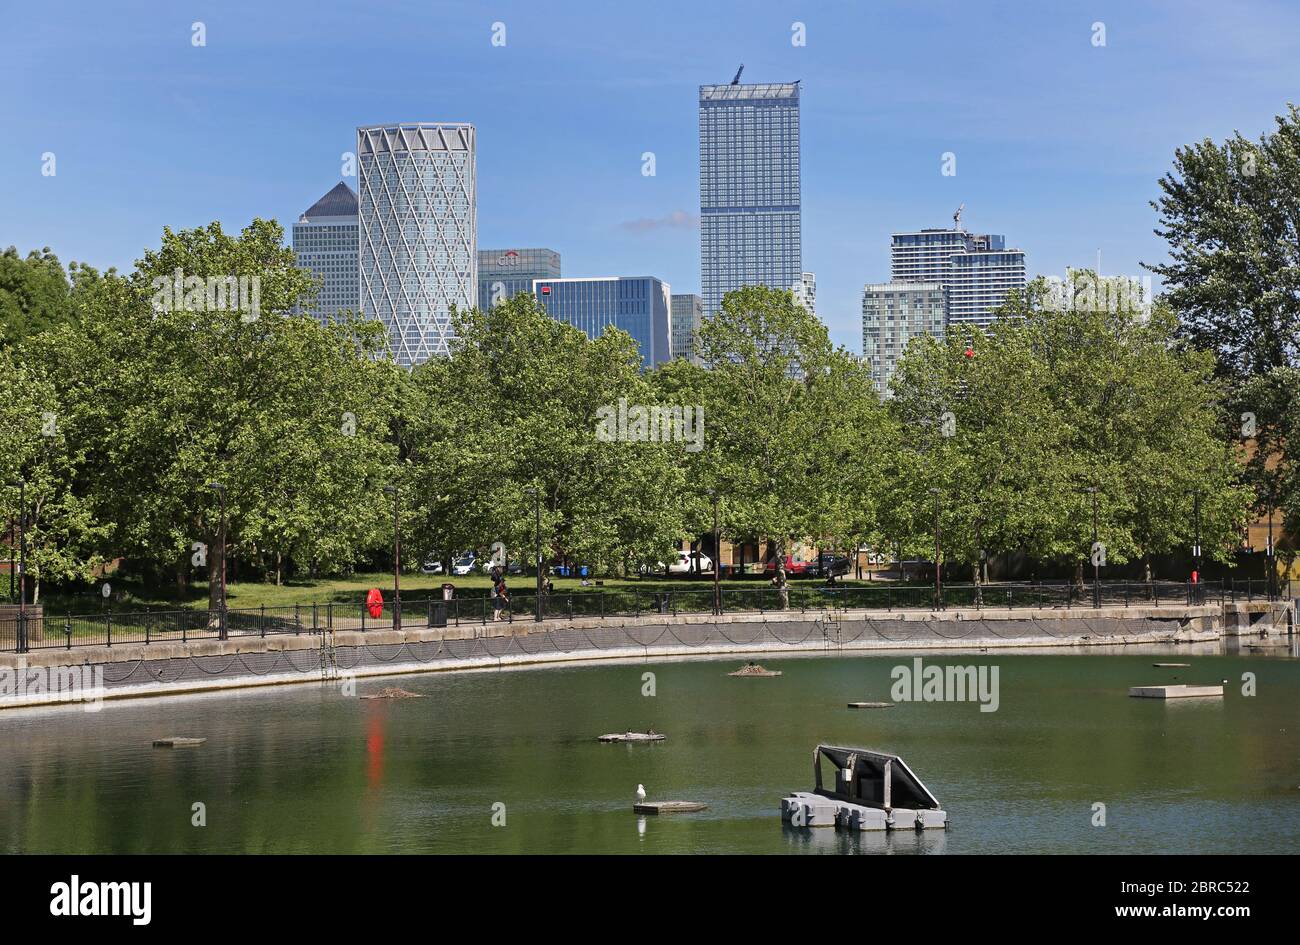 Canada Water, London. A new residential area developed in the 1980s on the site of the old Surrey Docks. Stock Photo